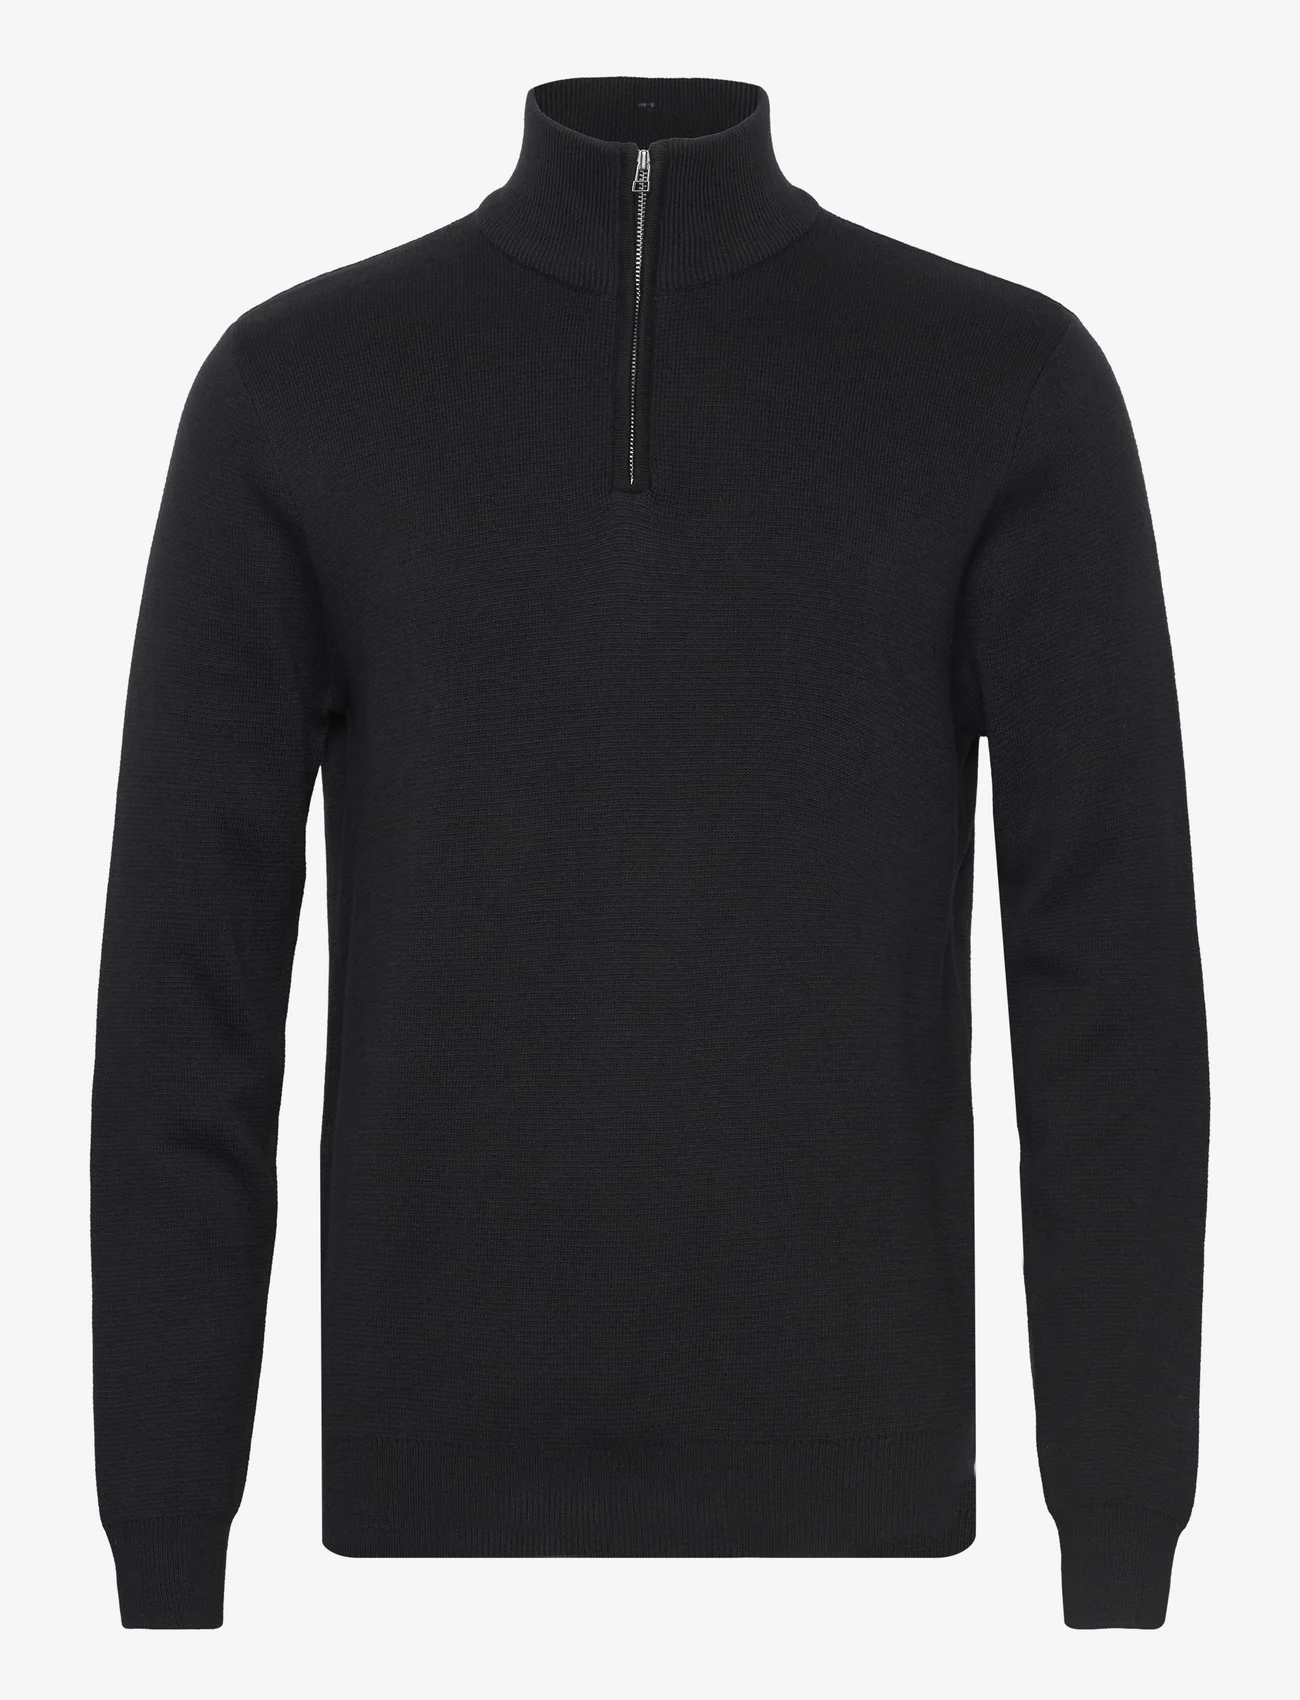 Casual Friday - CFKarl 0105 milano knit with zipper - miesten - black beauty - 0